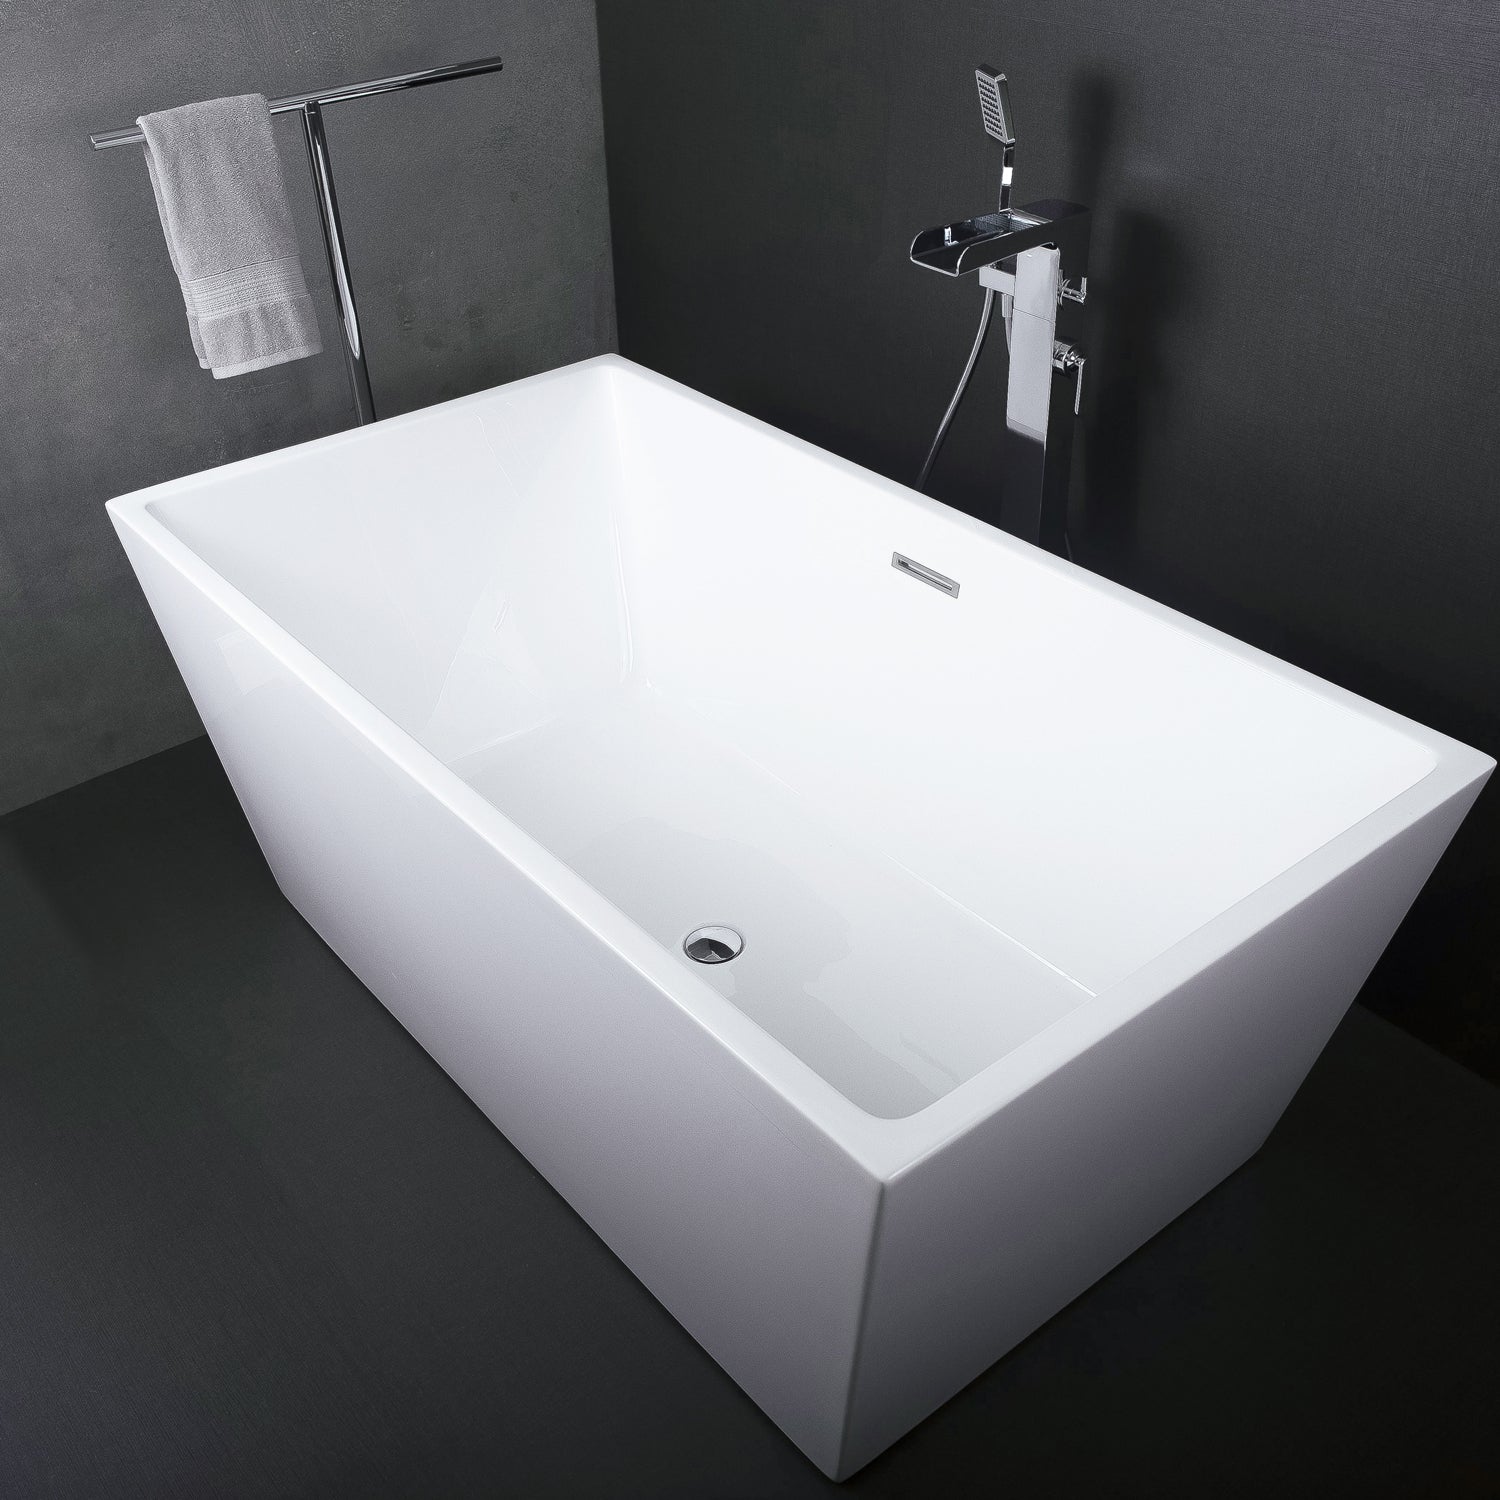 DAX Square Freestanding High Gloss Acrylic Bathtub with Central Drain and Overflow, Stainless Steel Frame, 59-1/16 x 23-5/8 x 31-1/2 Inches (BT-8013)